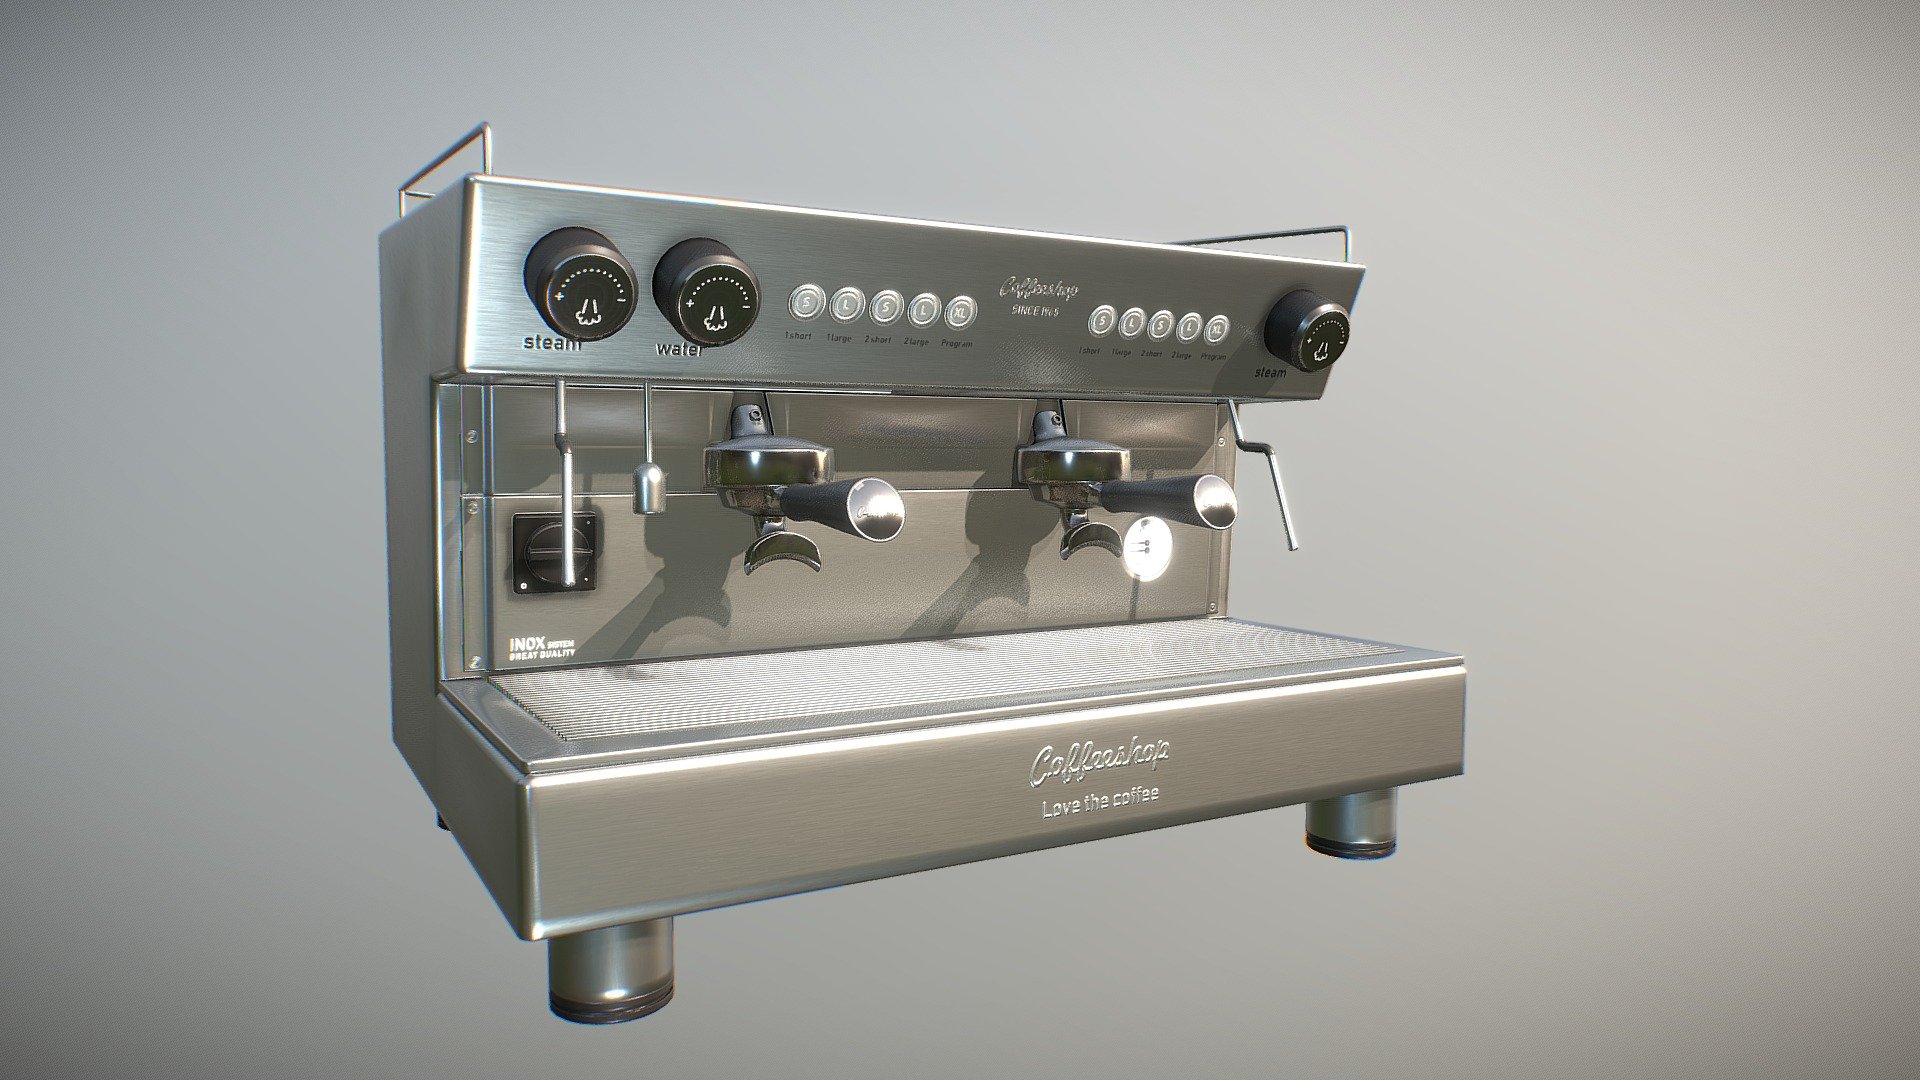 Bar coffee machine with only 7089 polys with non-overlapping uvs and PBR textures in 4096 x 4096 px (color, Normal map, height, metallic, roughness and Ambient occlusion). This model contain 1 only object. Besides it is ready to use in broadcast, advertising, design visualization, real-time, video game etc&hellip; - Bar coffee machine medium poly - Buy Royalty Free 3D model by markusenes 3d model